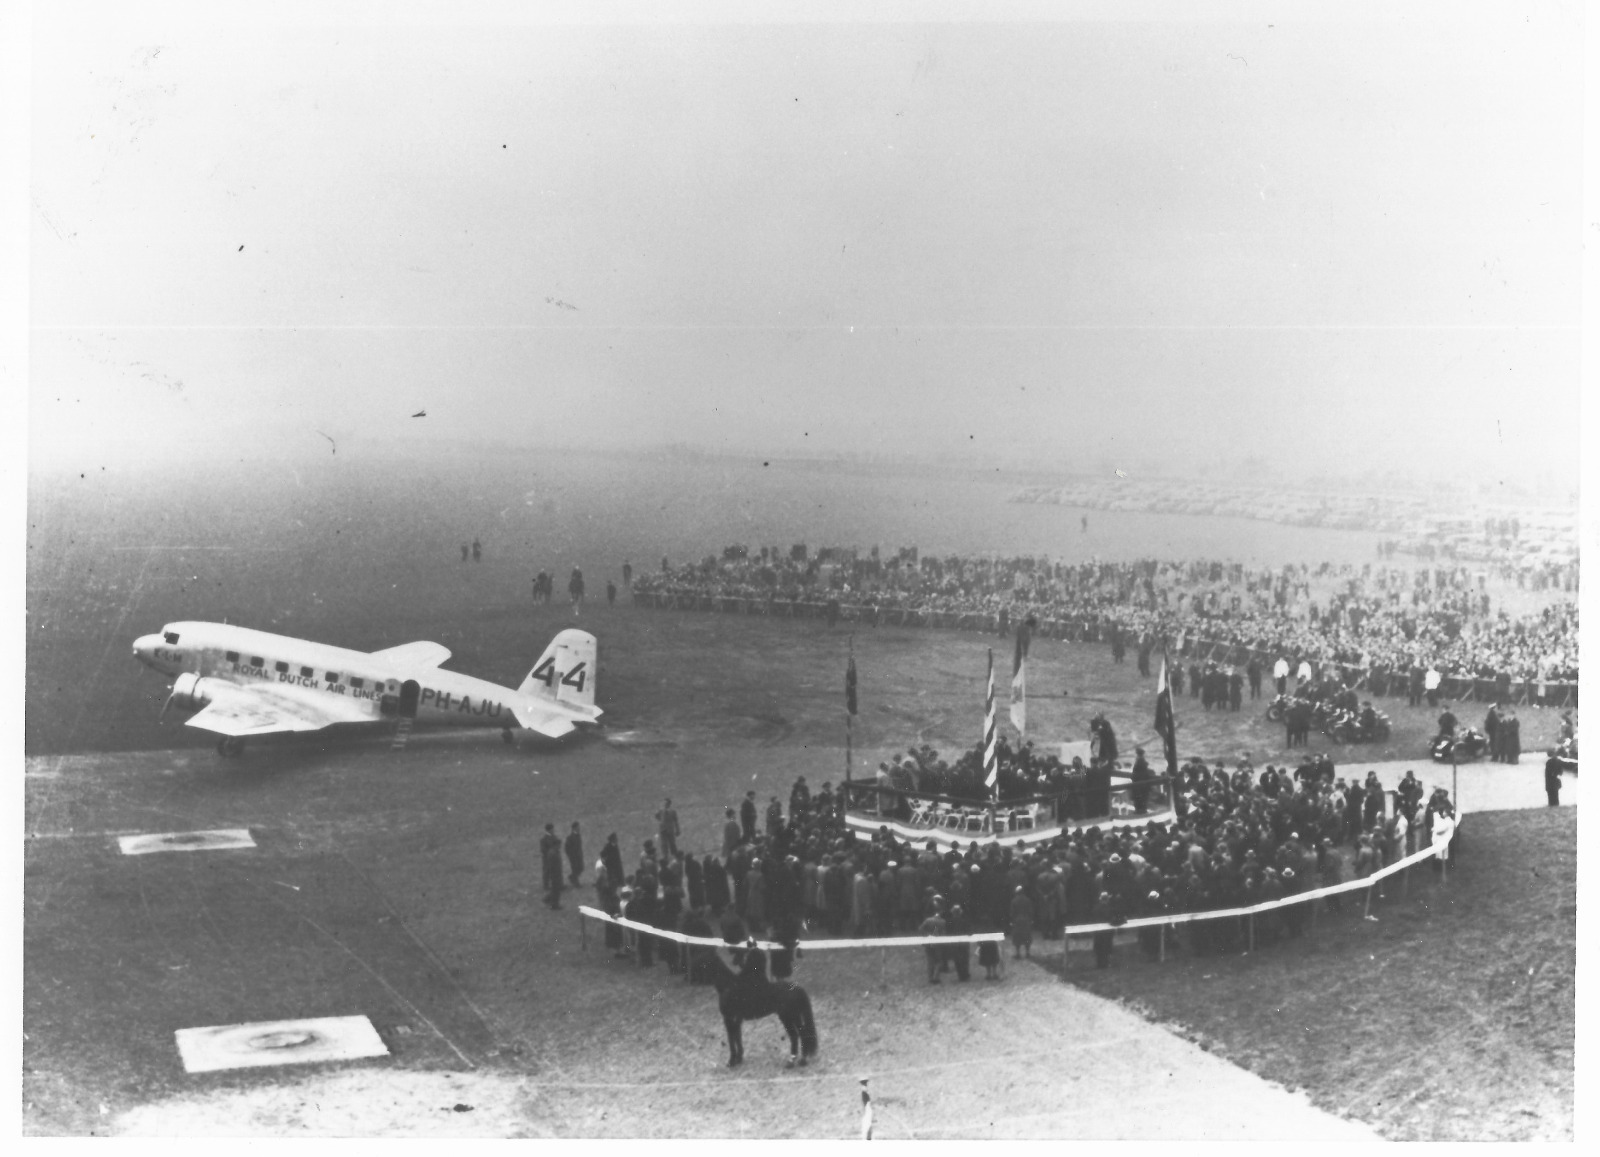 KLM Douglas DC-2 UIVER Photo 1934 London To Melbourne Air Race Winner, 8in x 10